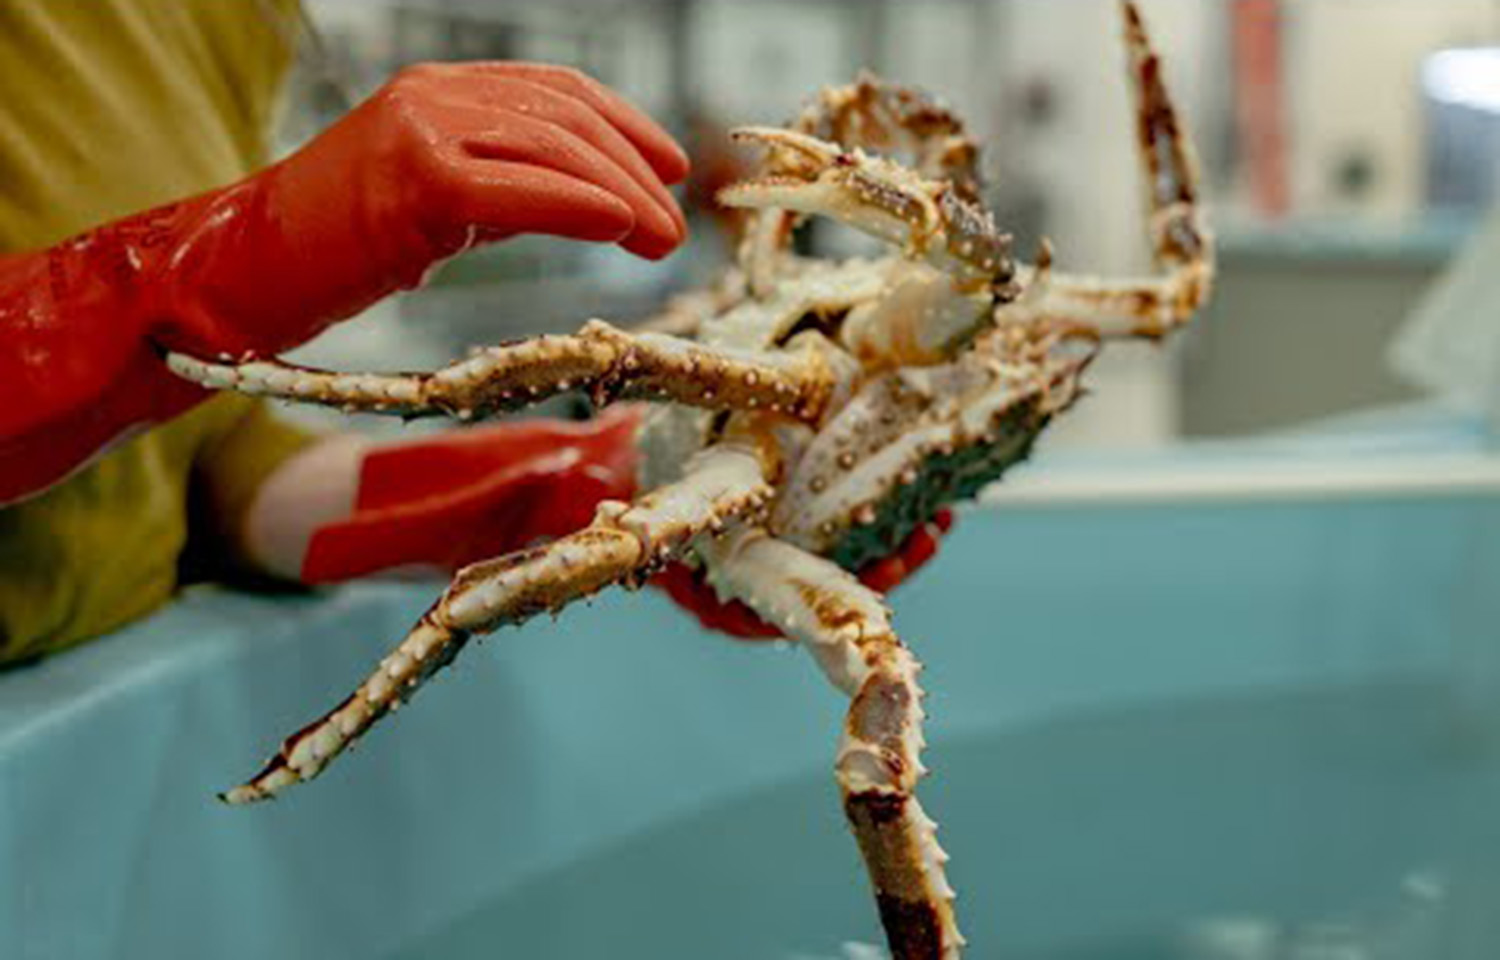 NPFMC opposes closure of red king crab “savings area” to